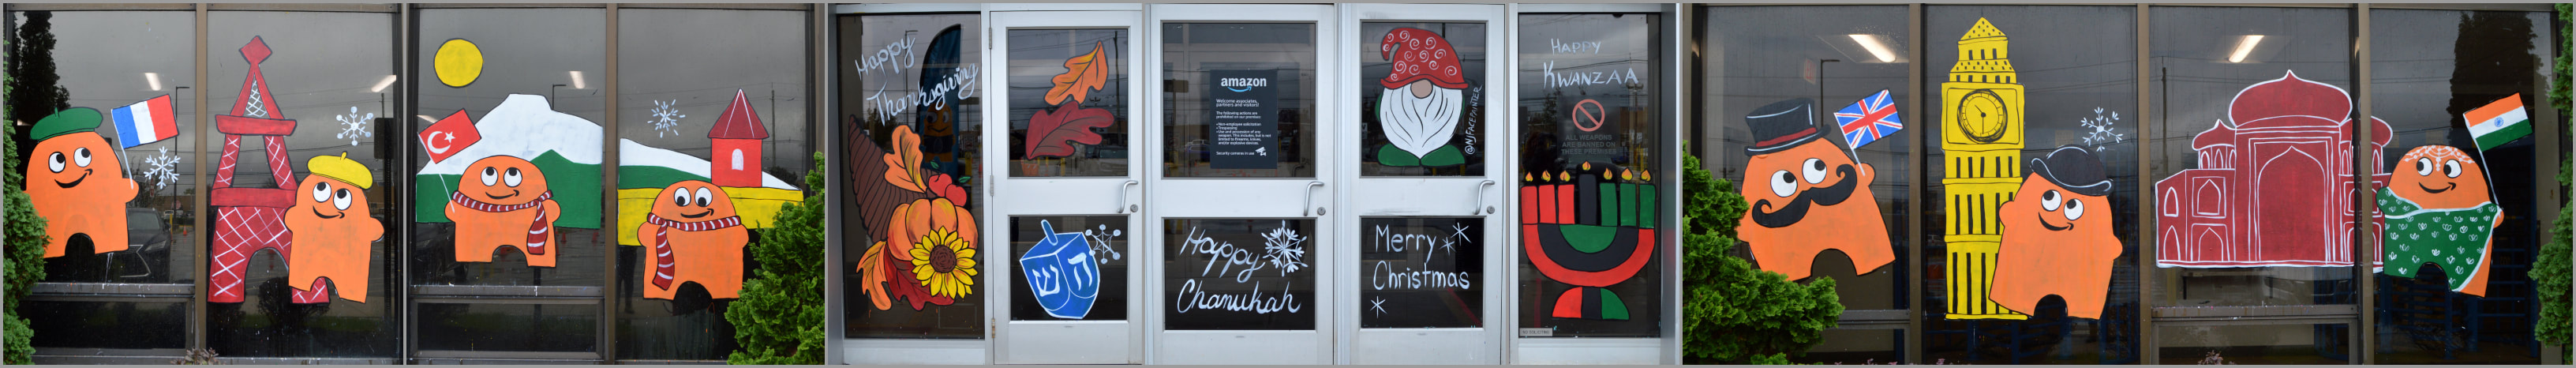 Fourth Quarter Window Paintings at Amazon Warehouse EWR5 in Avenel, Middlesex County, NJ, featuring the Peak Season Theme Winter Wonderland, Delivering Peak Around the World, and Thanksgiving, Chanukah, Christmas, and Kwanzaa